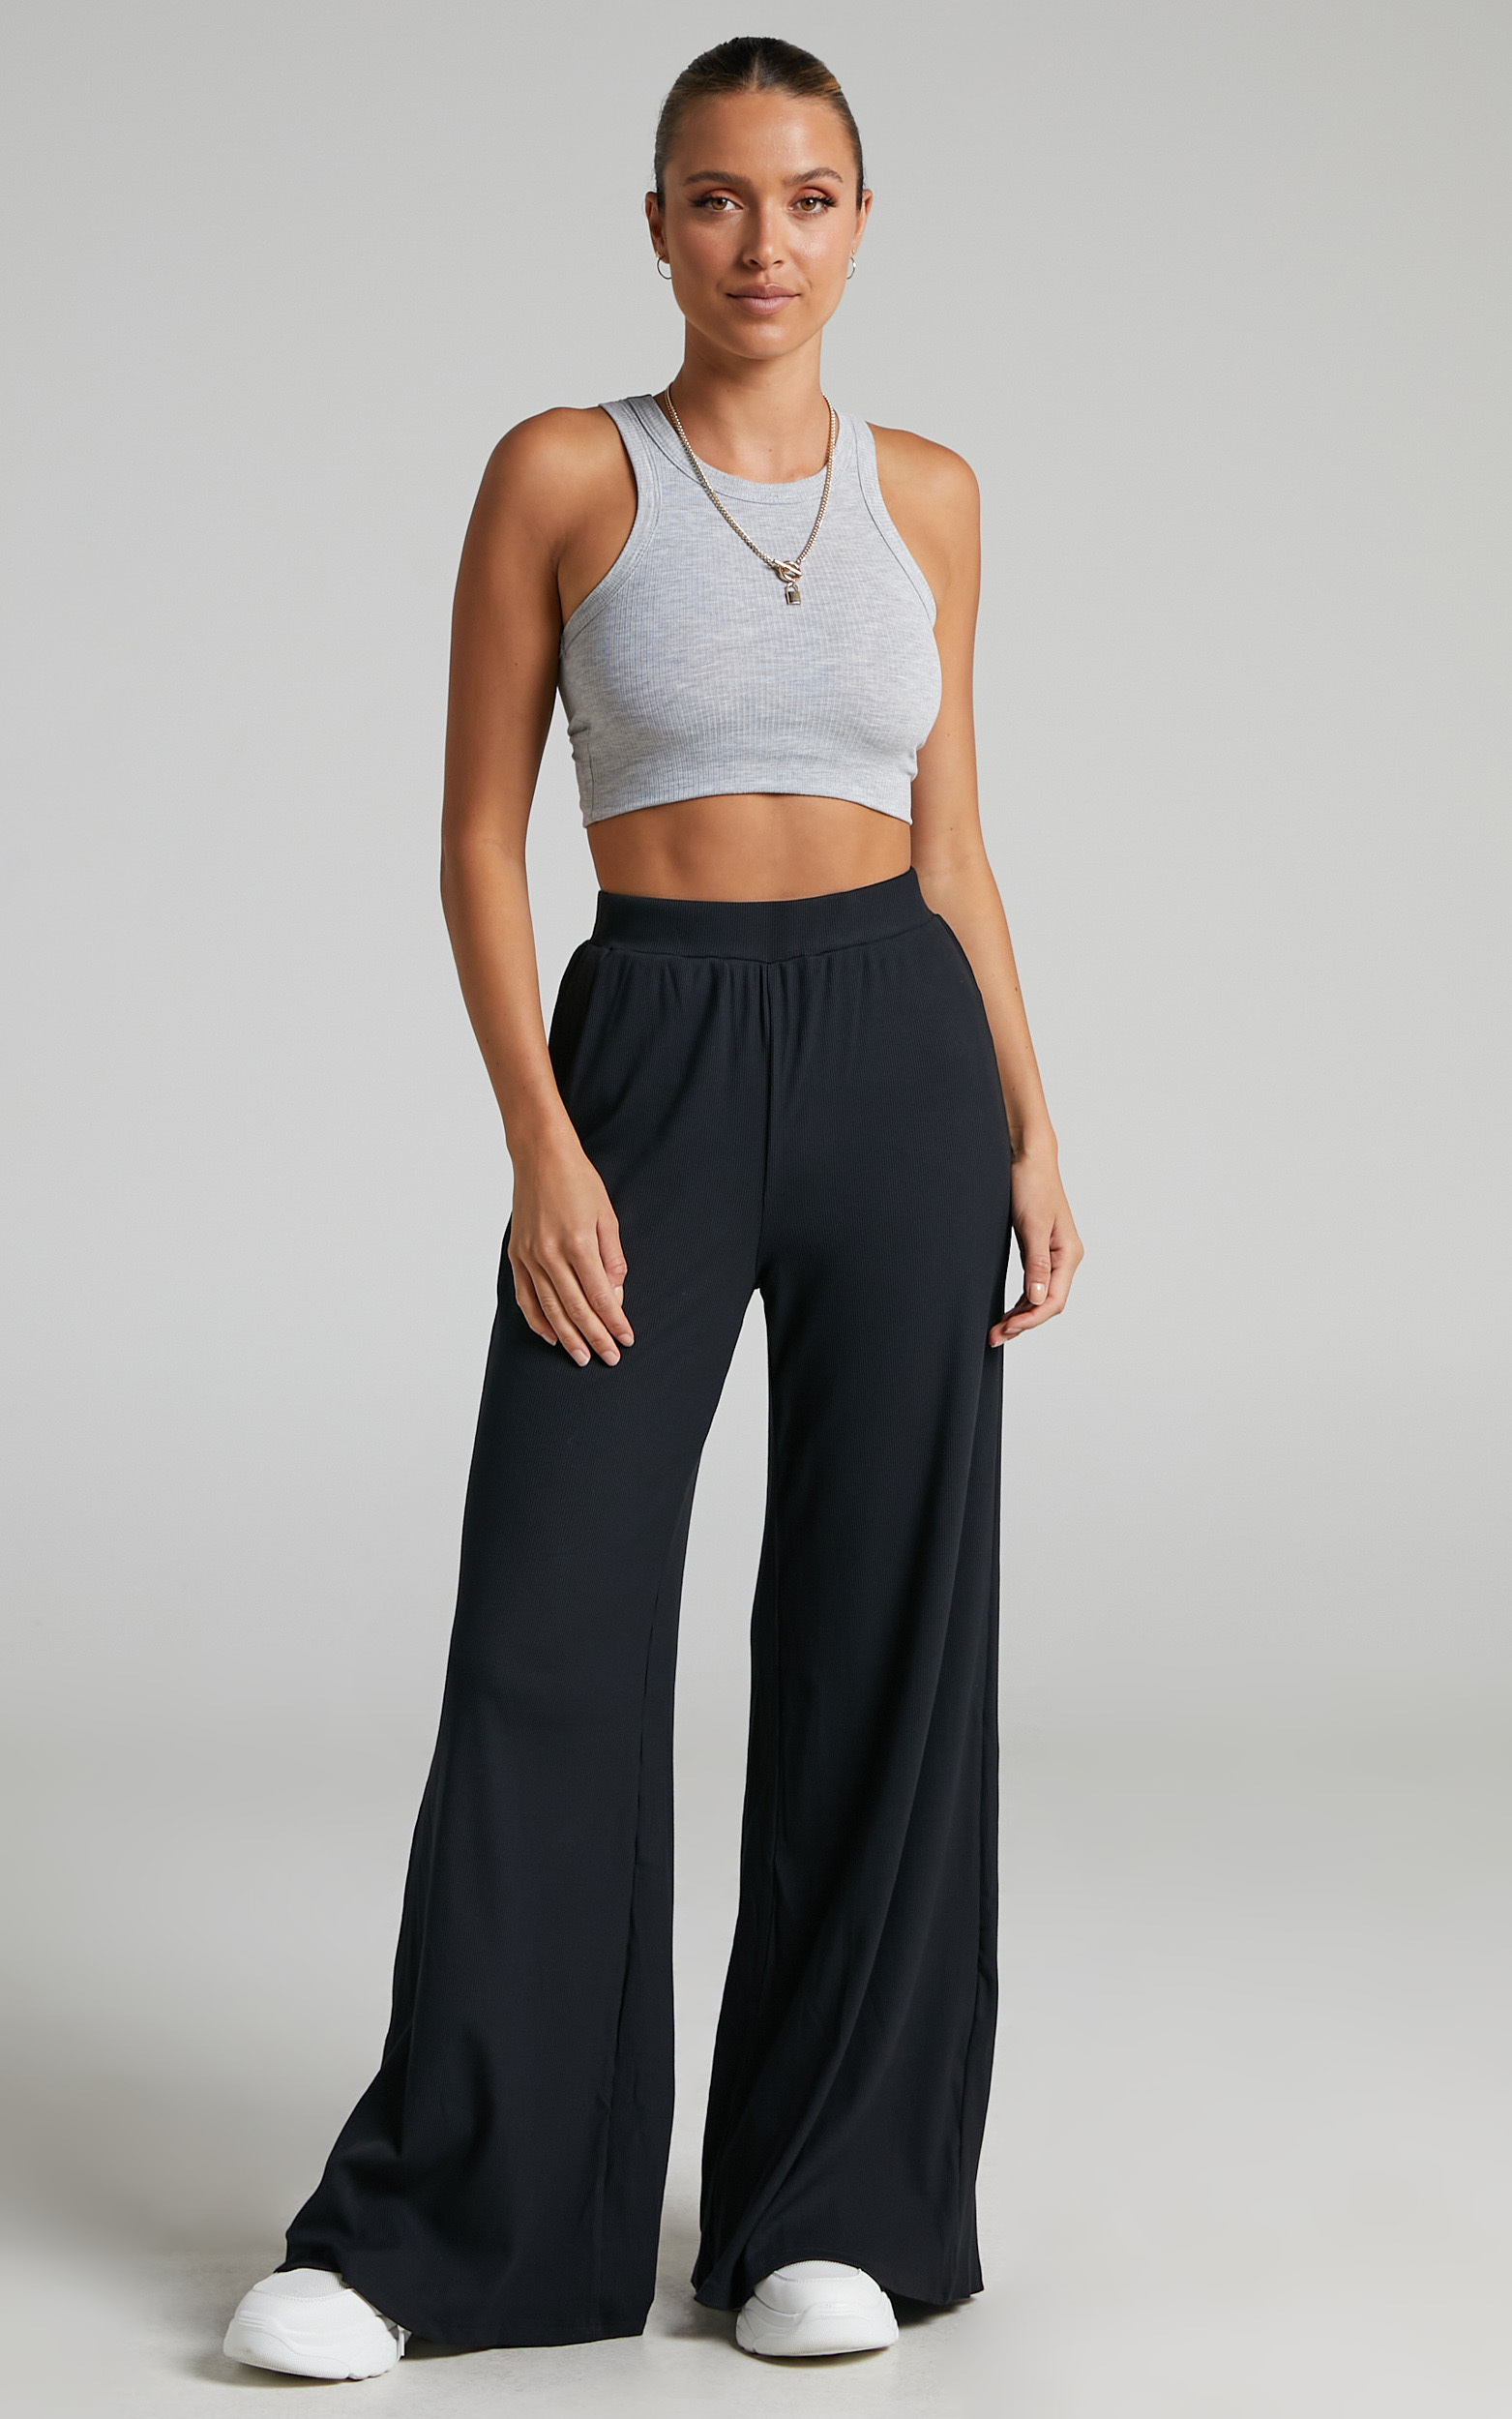 Amalthea Wide Leg Pant in Rib Knit in Black - 04, BLK1, hi-res image number null